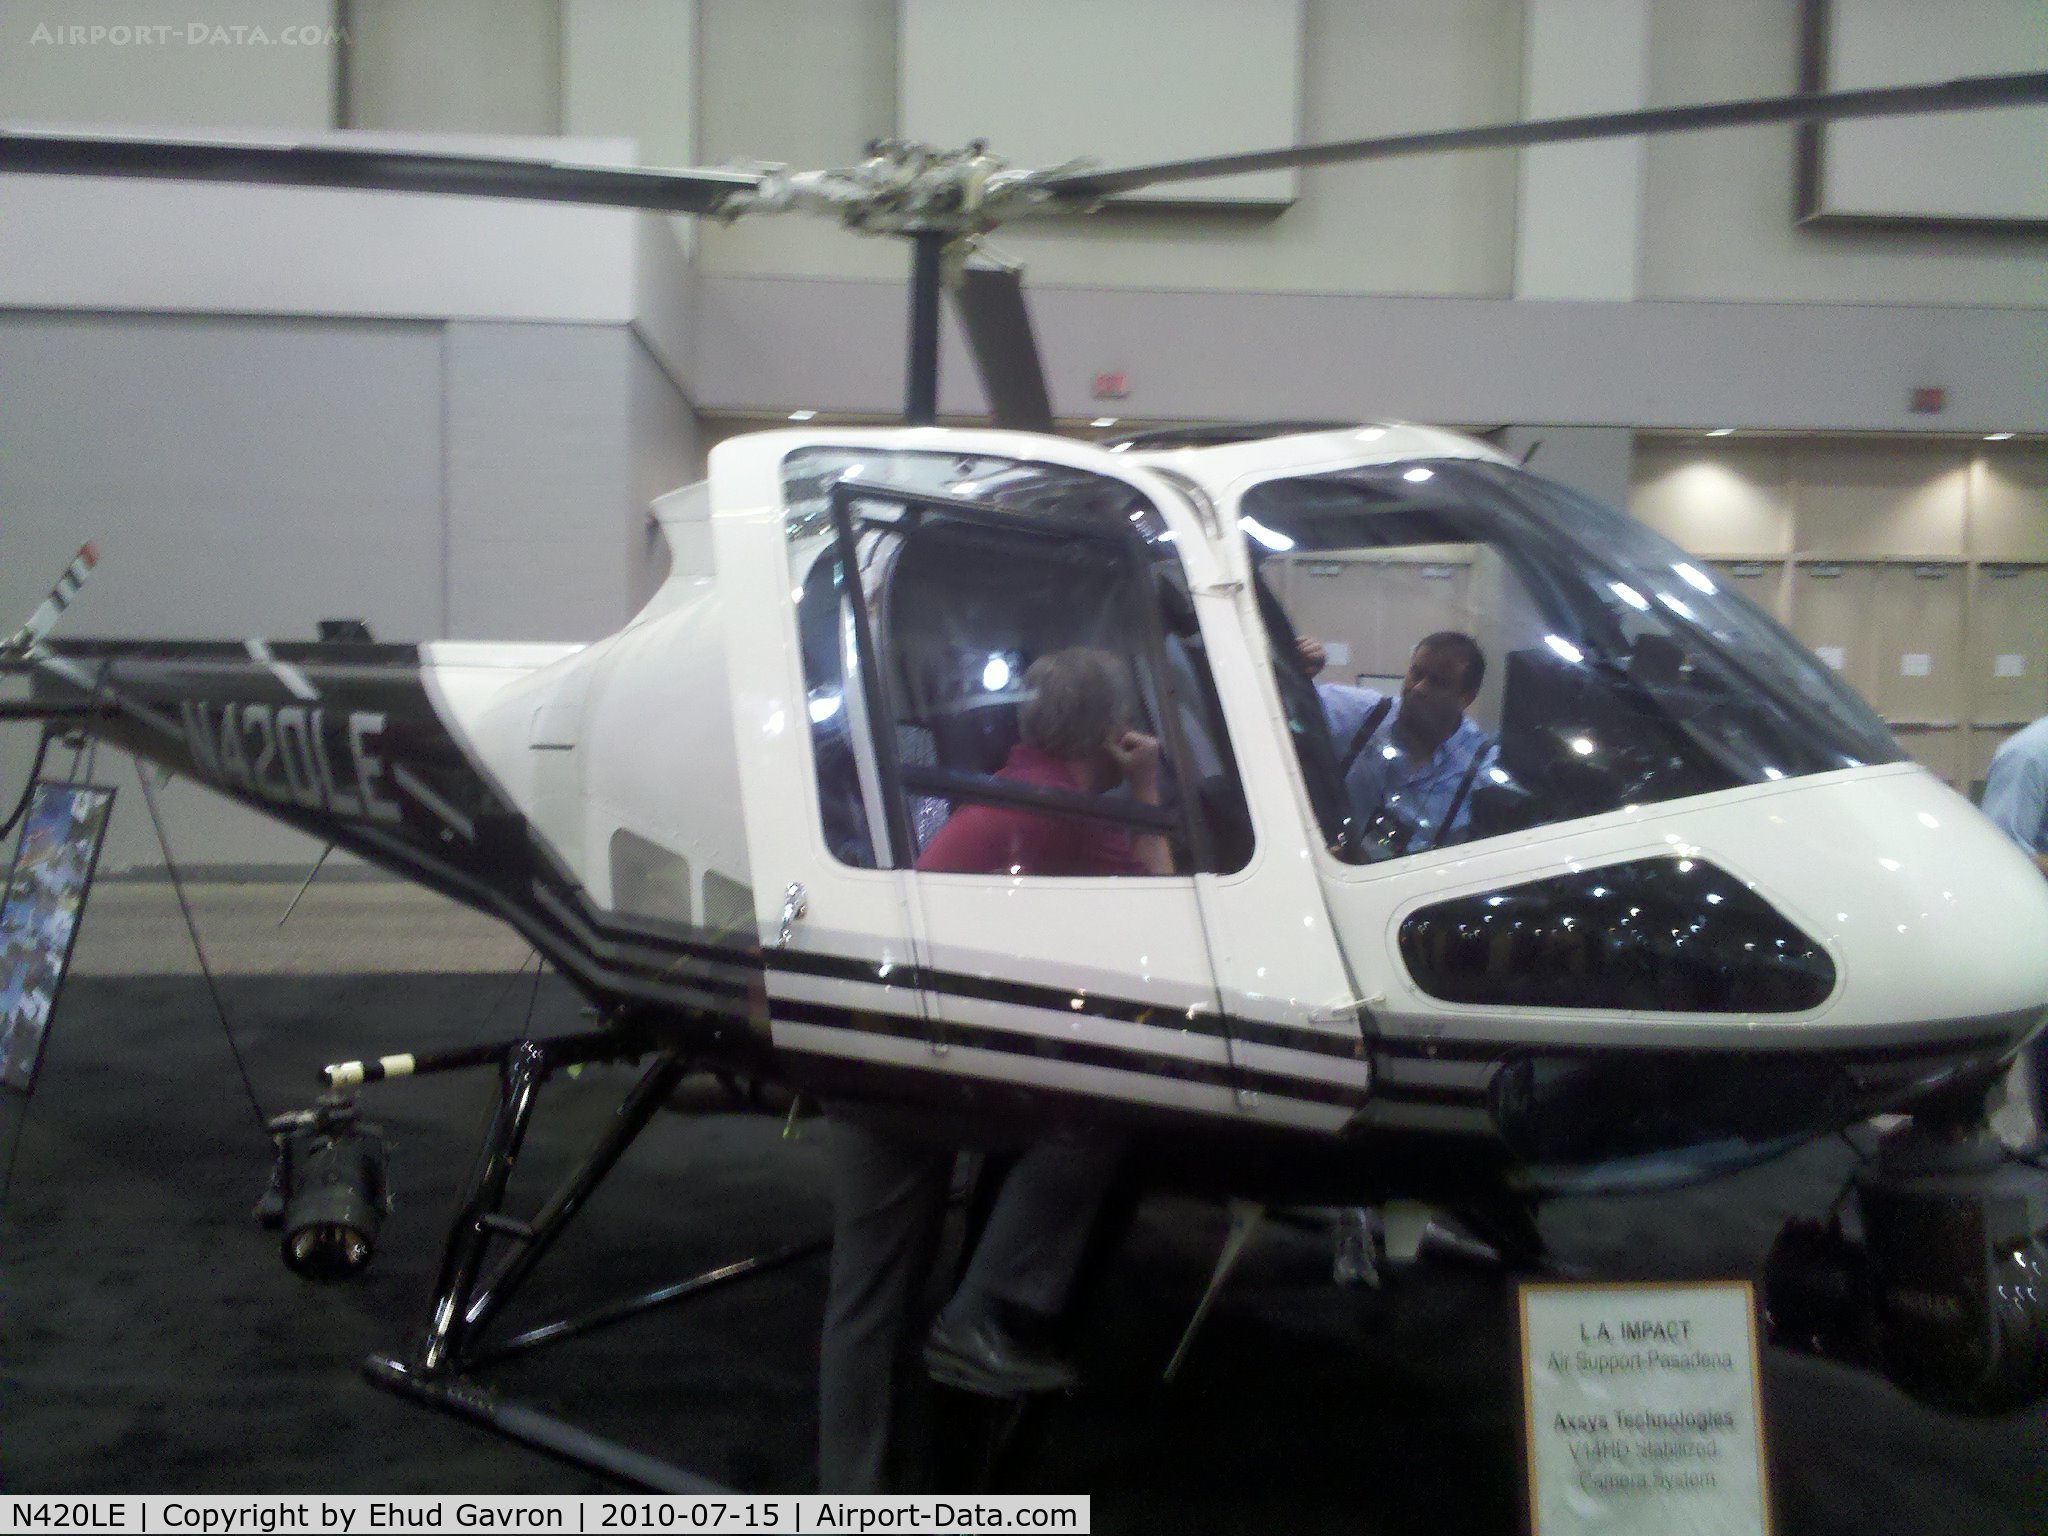 N420LE, 2006 Enstrom 480B C/N 5101, LA Impact police helicopter on display at the Airborne Law Enforcement Assocation convention, Tucson Convention Center, Tucson AZ.